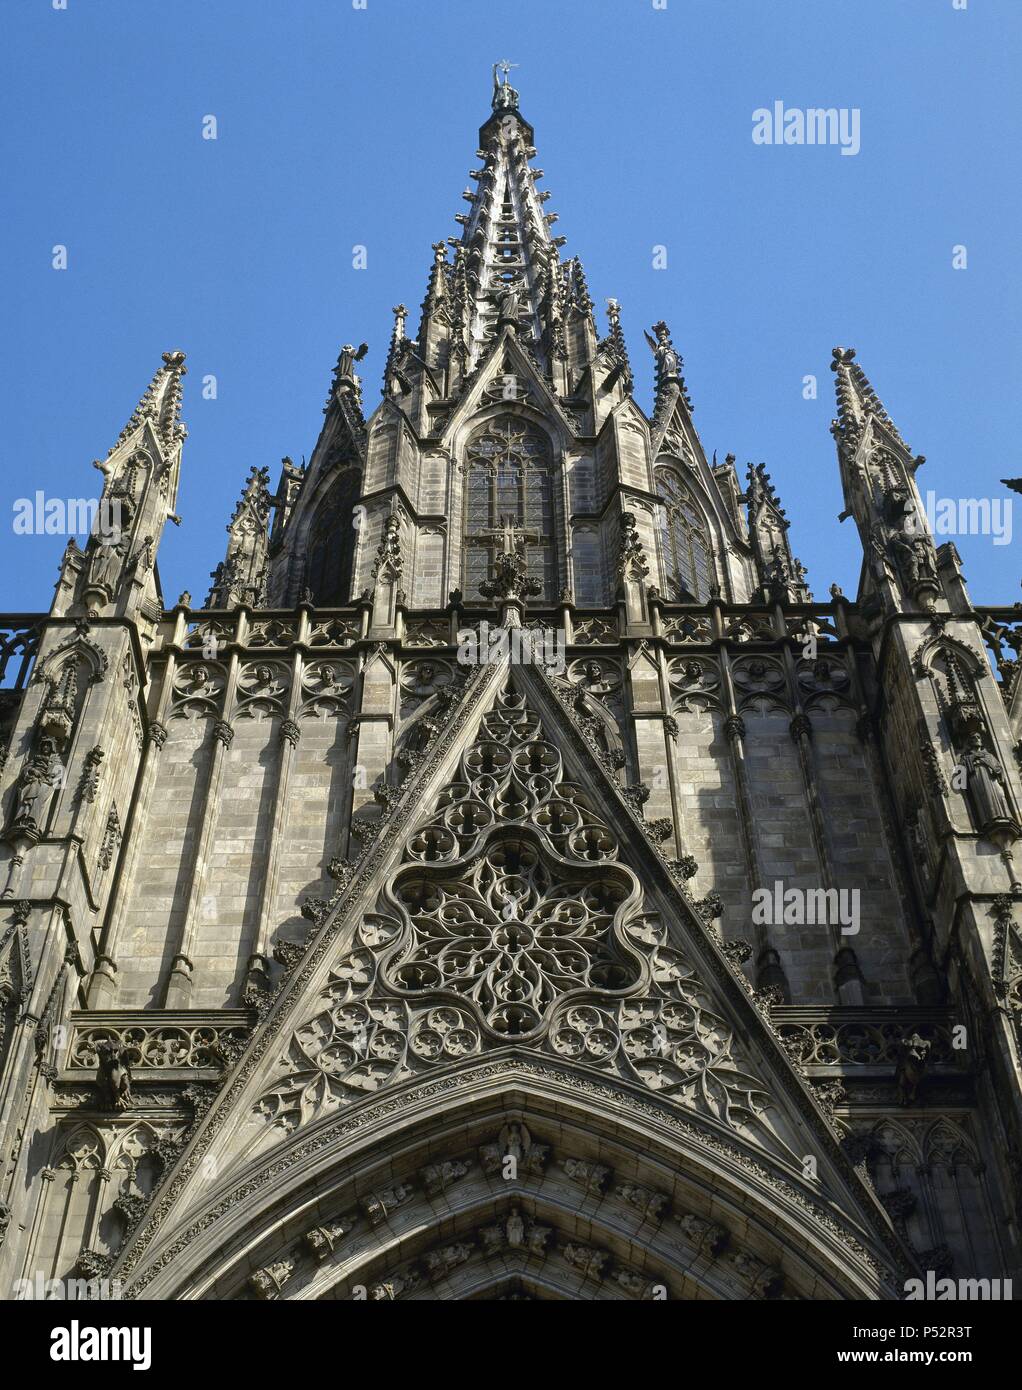 Spain. Barcelona. Cathedral. Facade, was built between 1885-1915, by the architects Josep Oriol Mestres (1815-1895) and August Font i Carreras (1846-1924). Neogothic style. Stock Photo